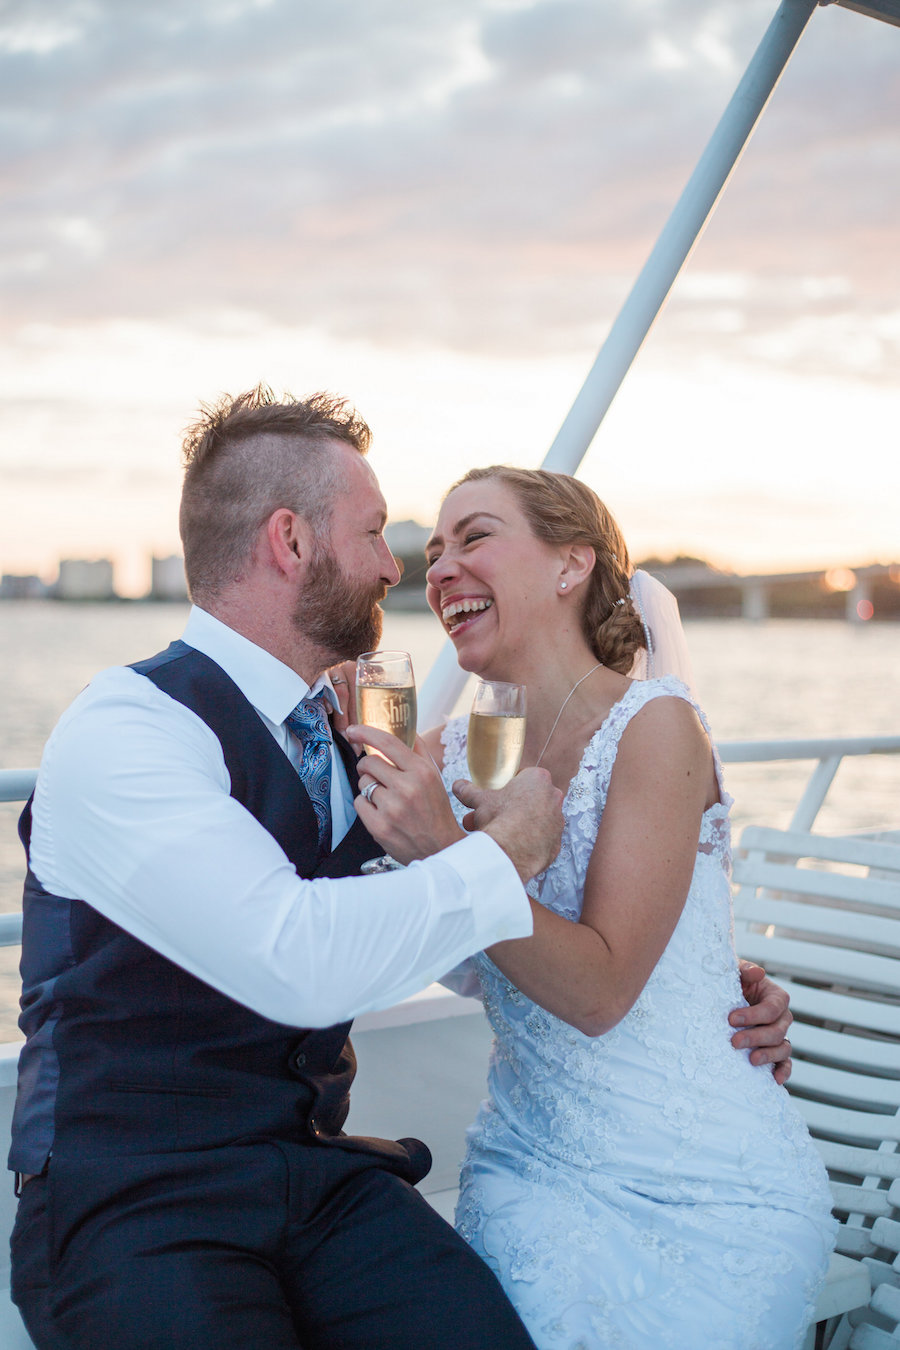 Bride and Groom, Champagne Cheers on Waterfront Wedding Portrait aboard Clearwater Wedding Venue the Yacht Sensation | Jillian Joseph Photography